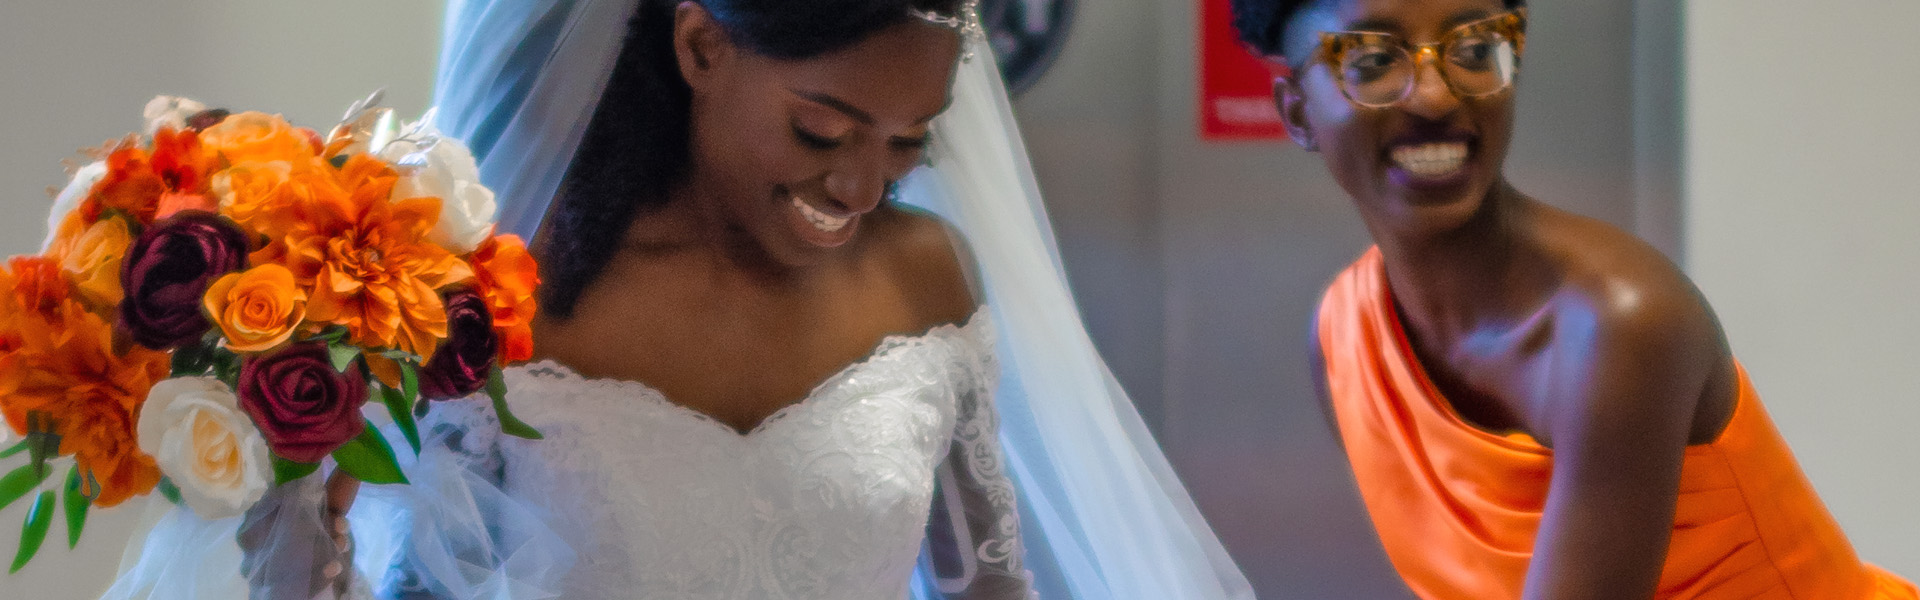 wedding-video-photography-project-brooklyn-nyc-elsimage